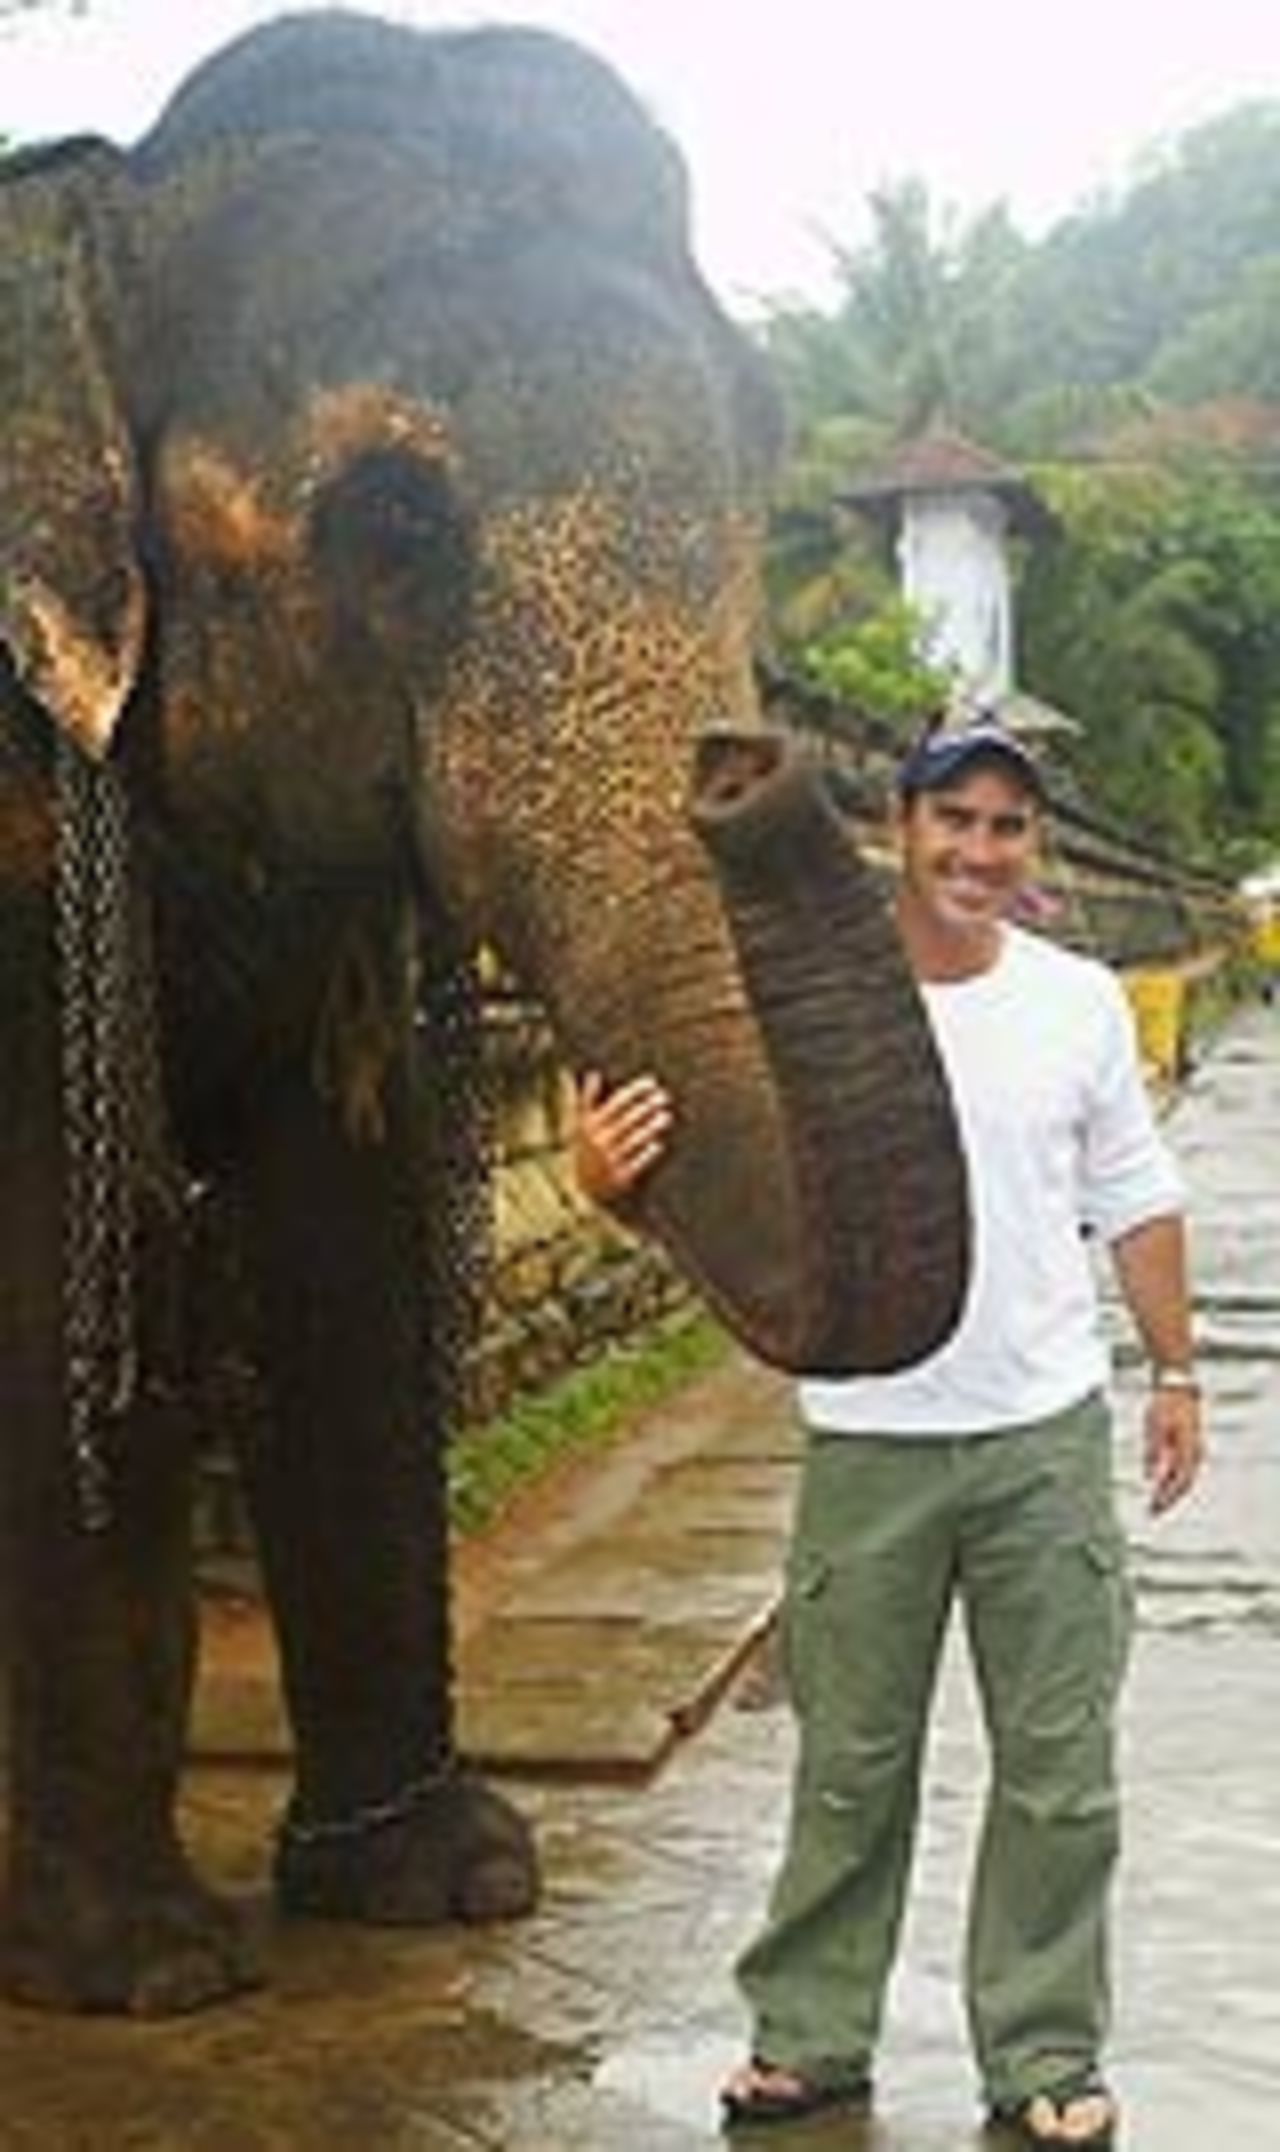 Justin Langer and an elephant, Temple of the Tooth, Kandy, March 15, 2004